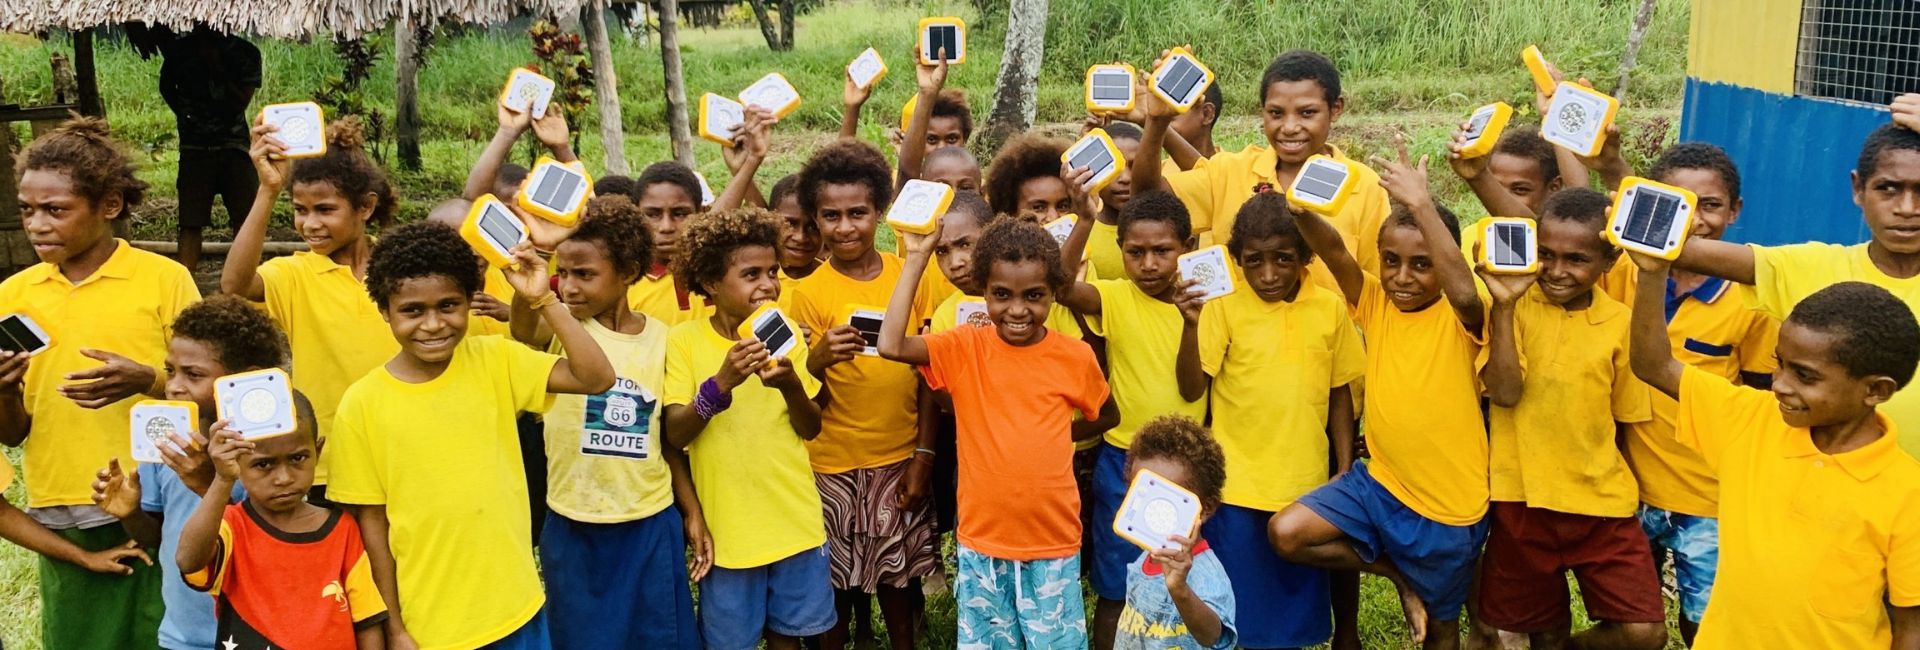 Provide Solar Lighting to Students and Teachers in Papua New Guinea, to Prevent the Use of Toxic, Costly Lighting Alternatives.